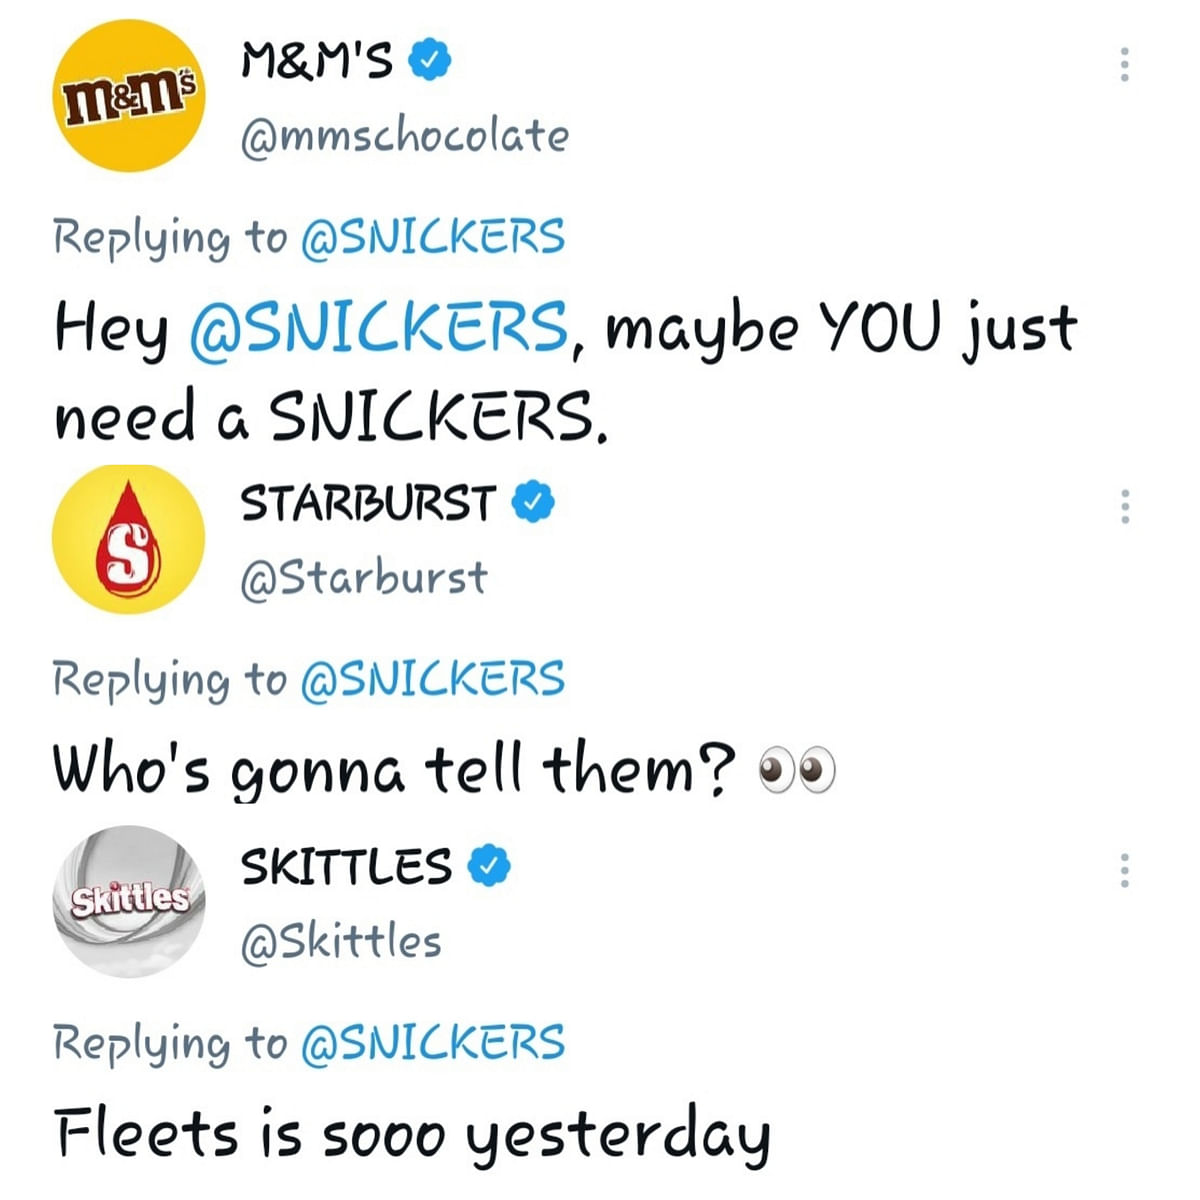 Offering sweepstakes on Twitter’s Fleets, Snickers makes the most of the dying feature